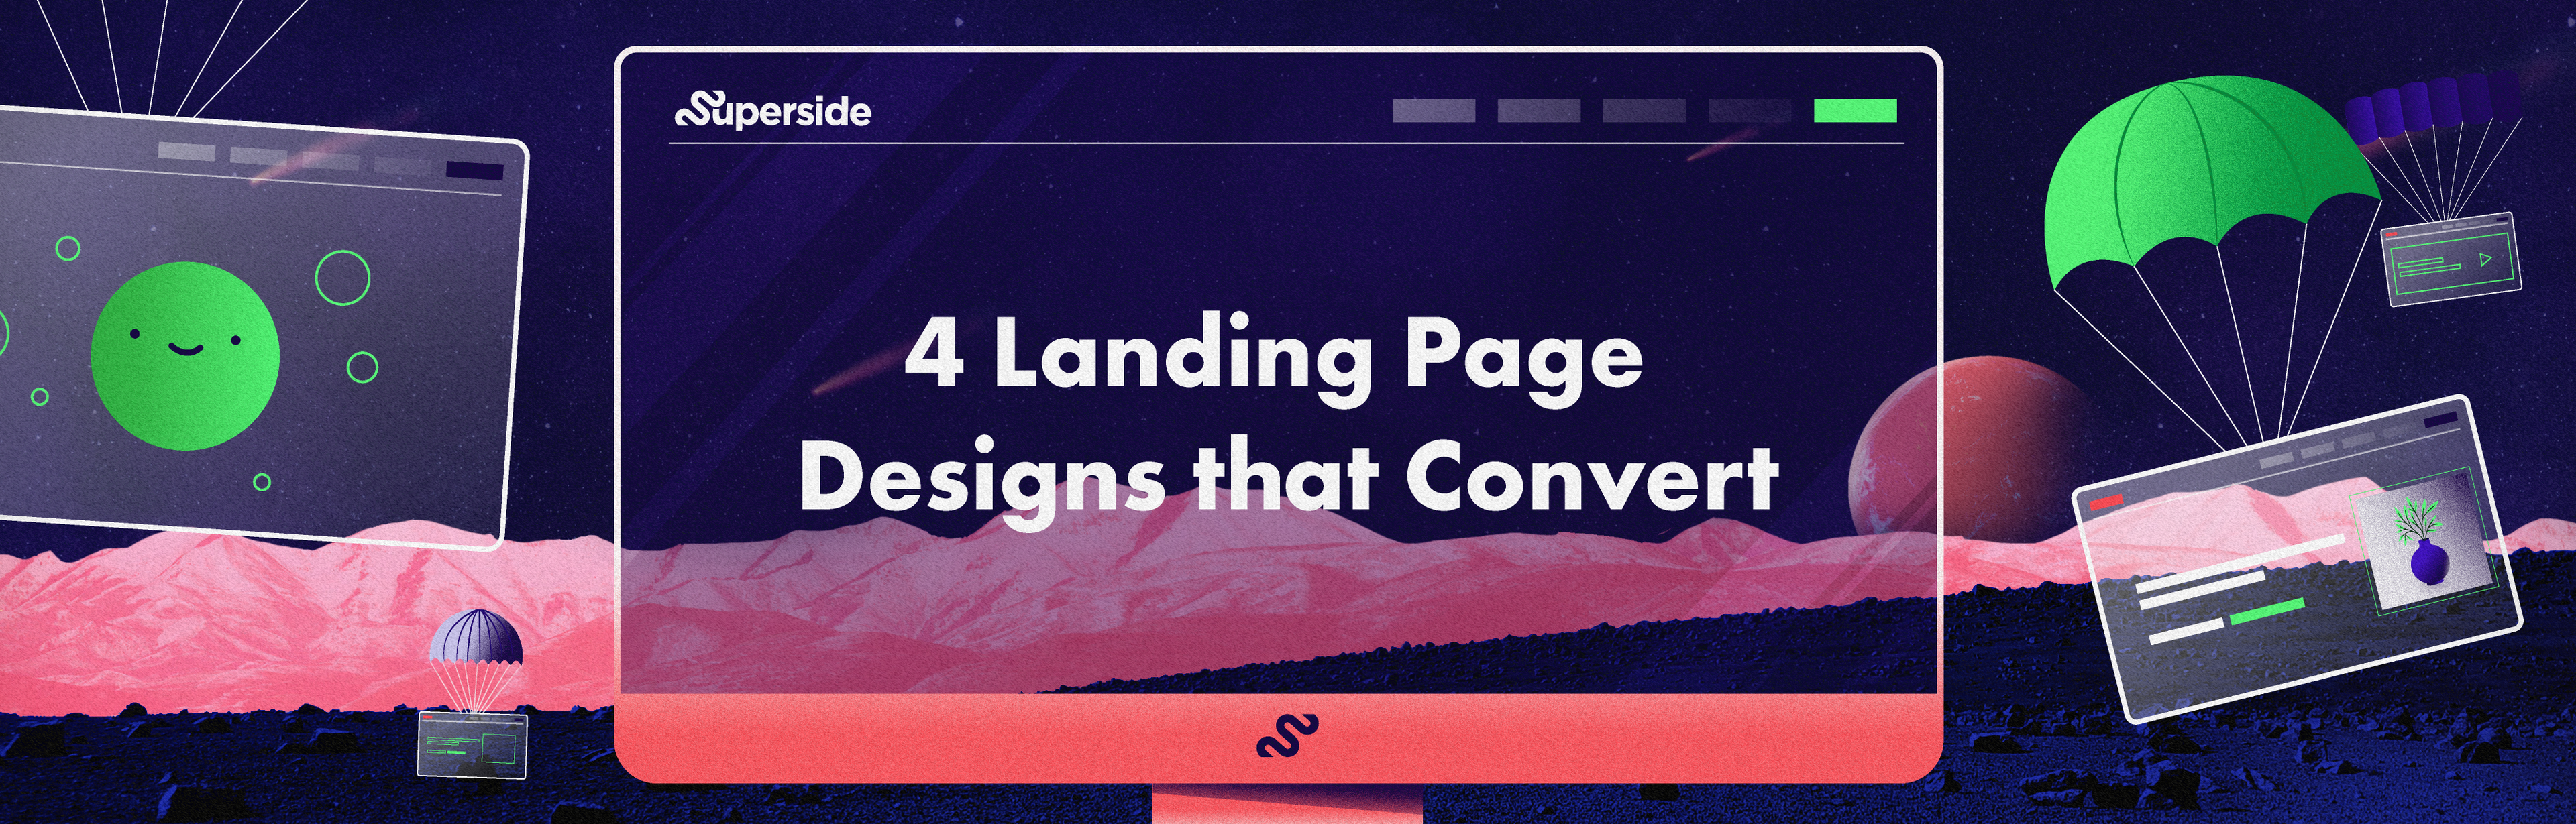 4 Landing Page Ideas to Drive More Conversions - Superside